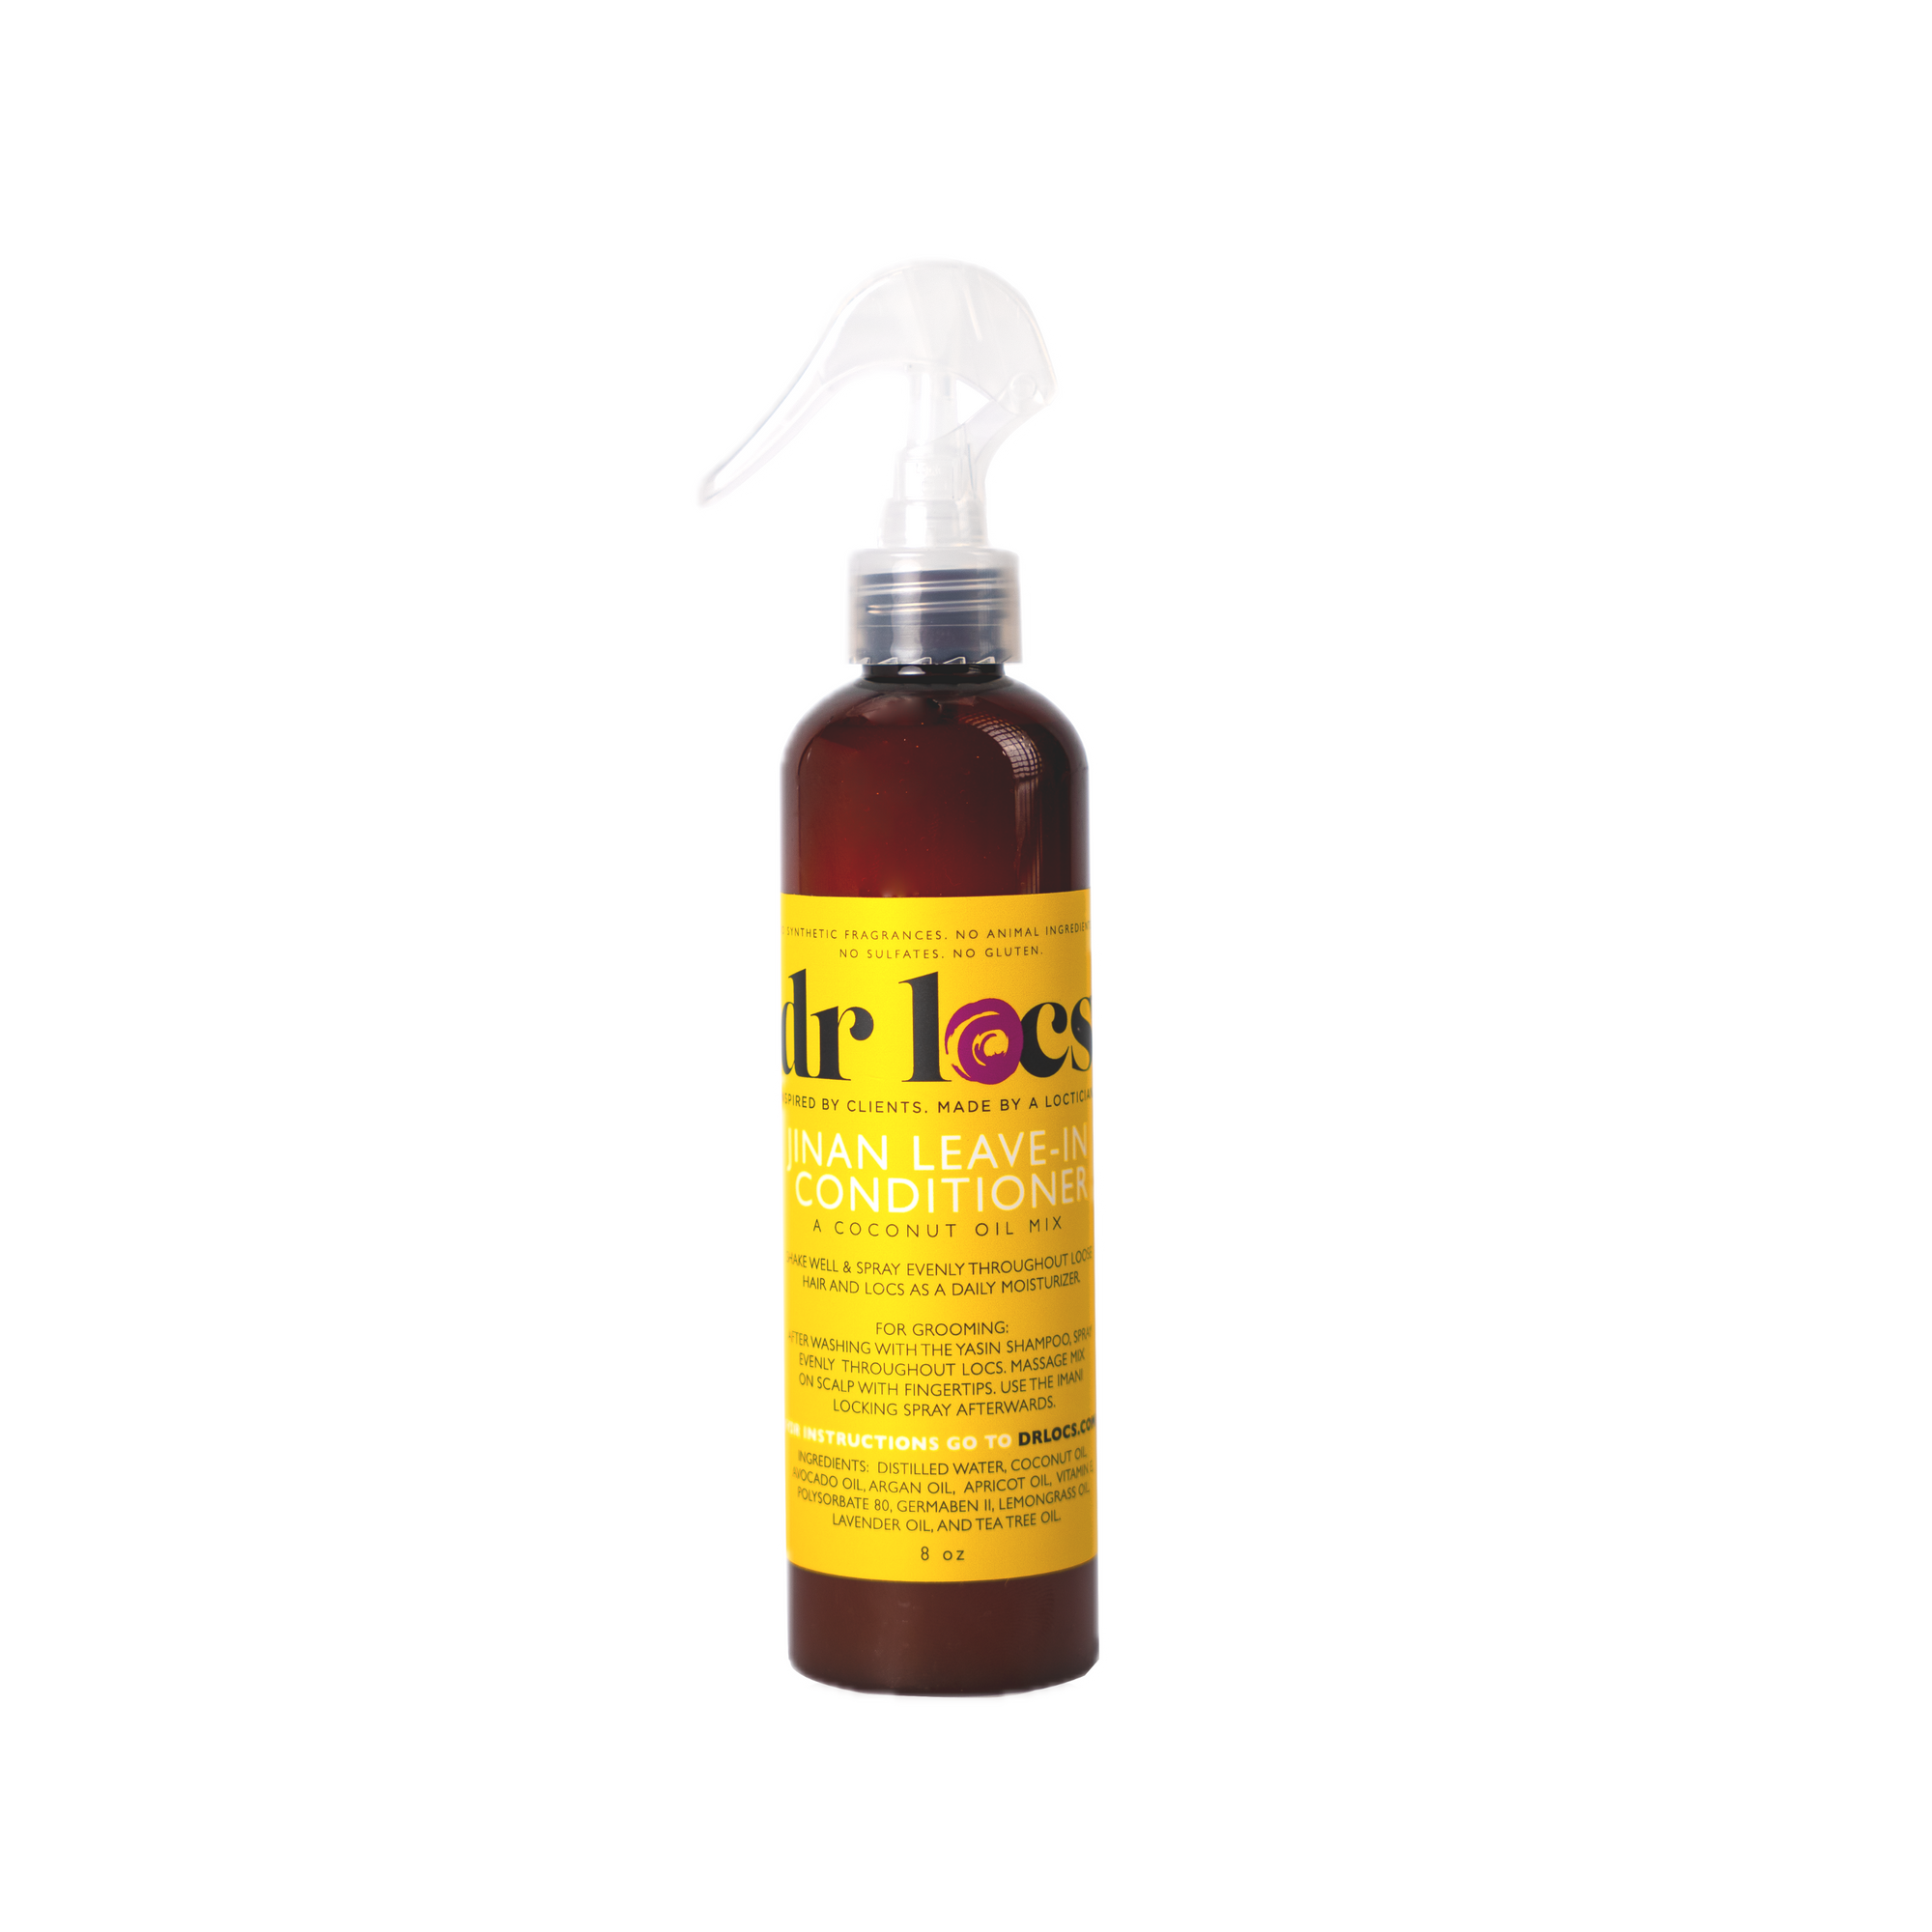 Dr Locs Jinan Moisture Mix Leave-In Conditioner